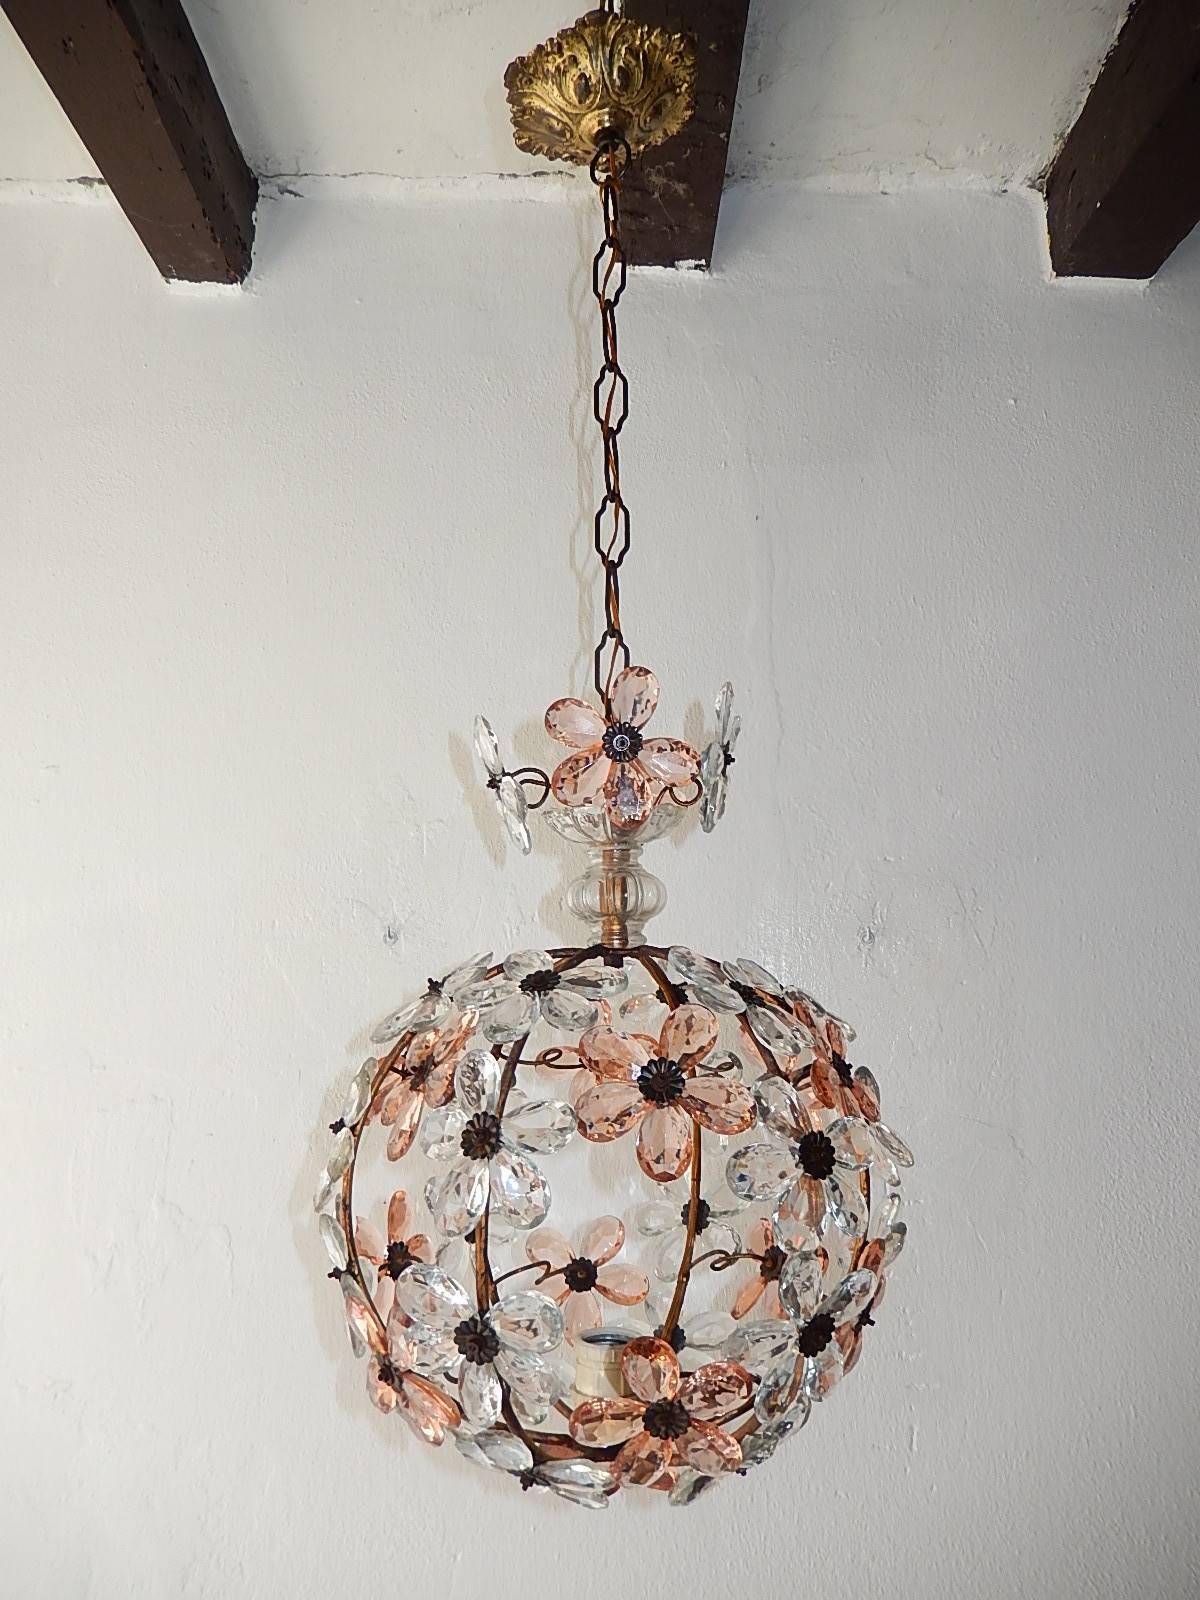 Housing one light. Rewired and ready to hang. Clear pink/light peach crystal prisms. (Not amber, some pictures look darker using flash) Murano glass and crystal bobèches on top. Adding another 13 inches of original chain and canopy. Free priority